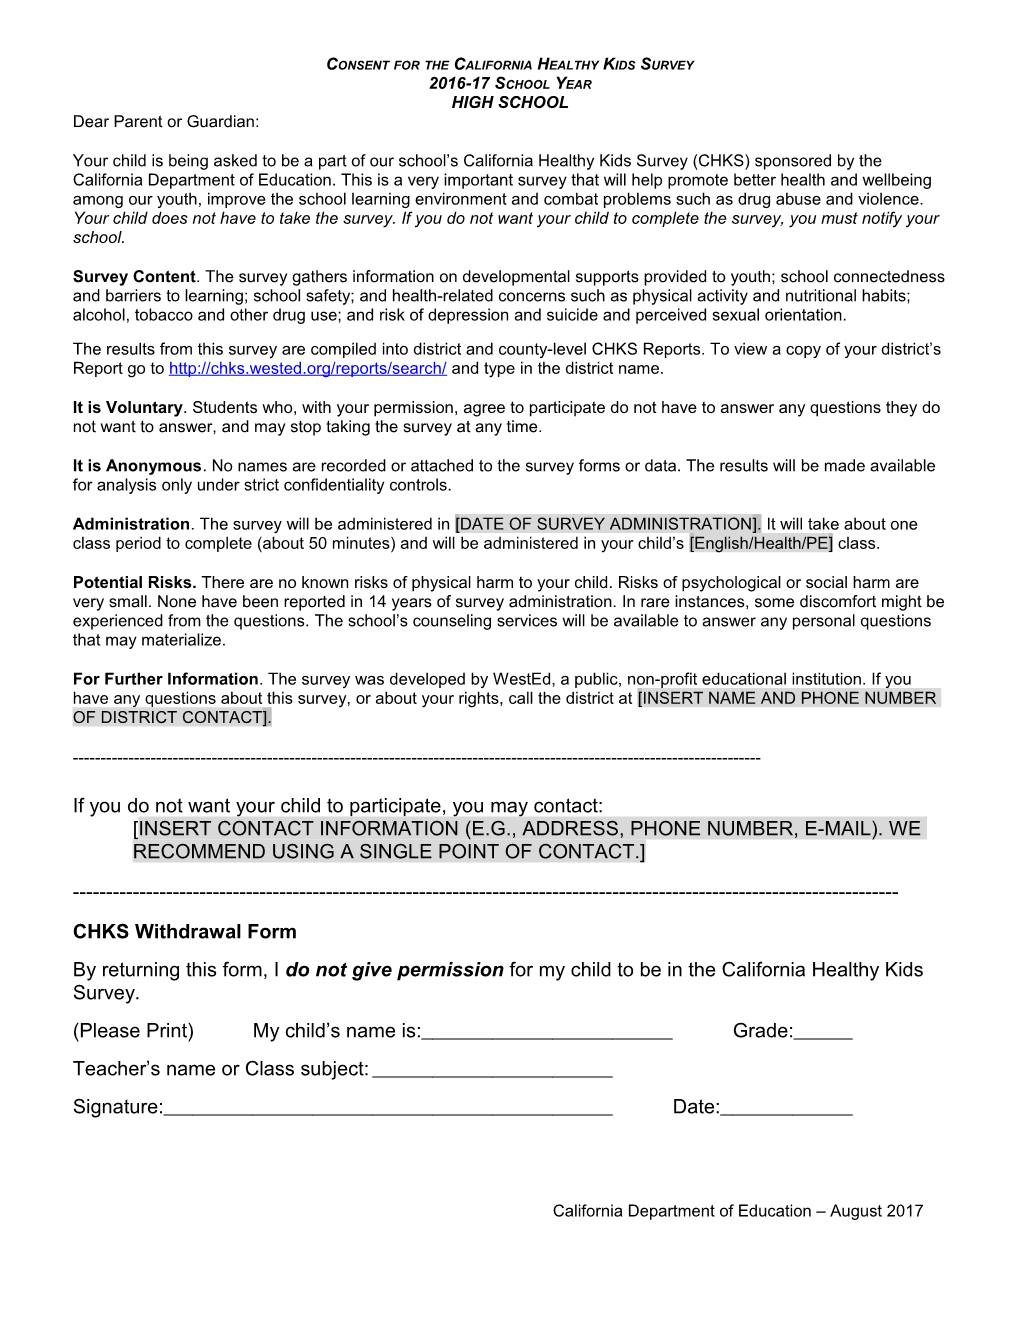 CHKS Active Consent Form Elementary - Alcohol, Tobacco & Other Drug Prevention (CA Dept